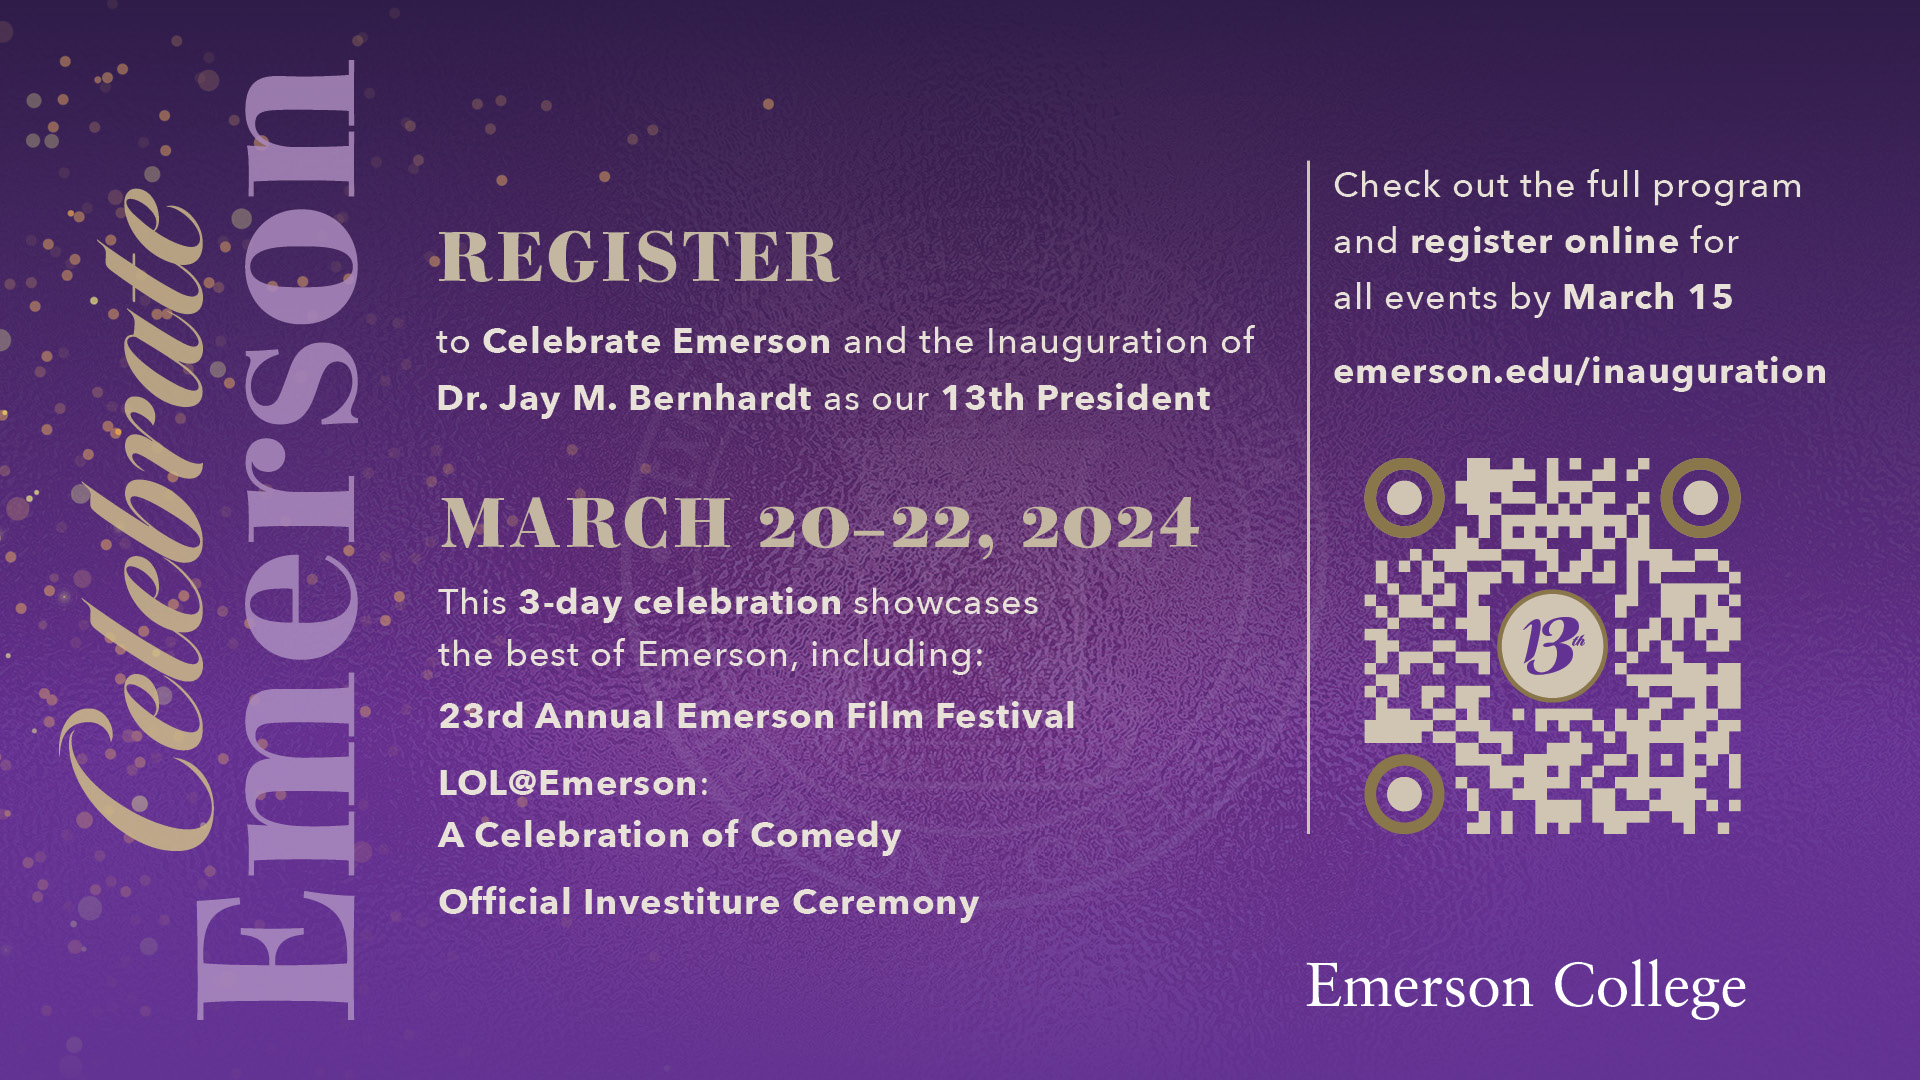 RSVP for Inauguration events by March 15 at emerson.edu/inauguration